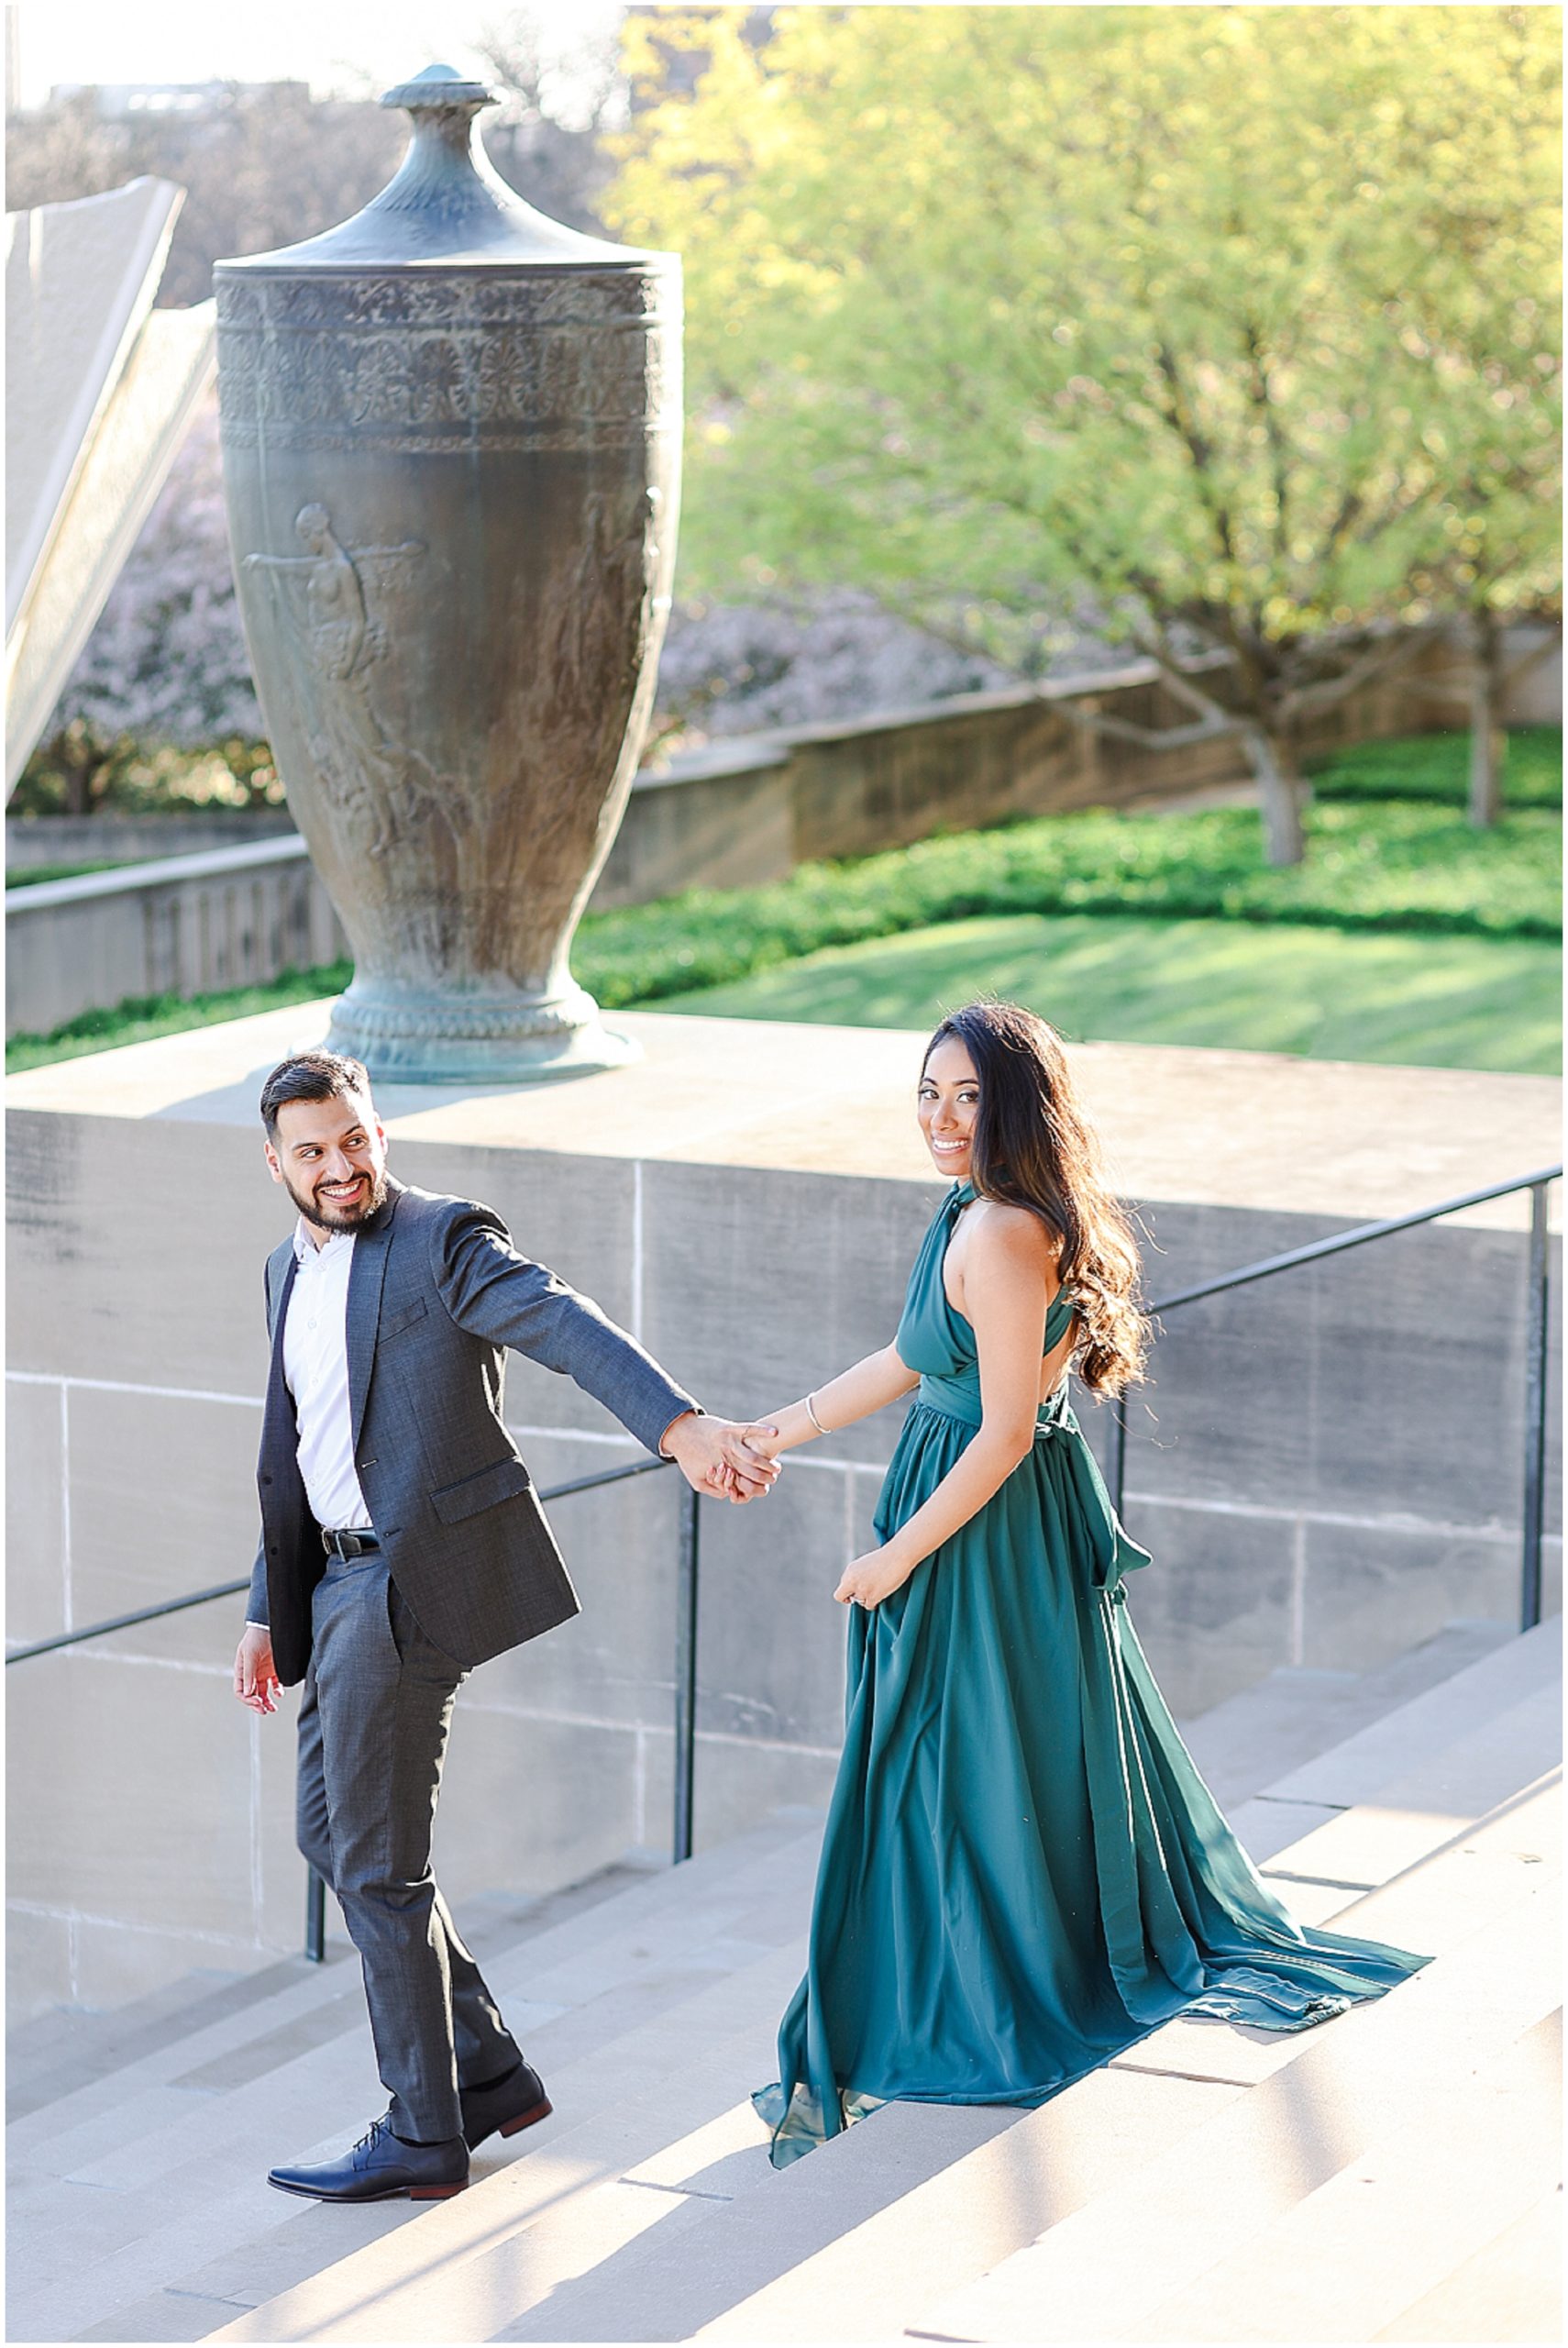 Fusion Indian Engagement Photos at Kansas City Nelson Atkins Museum for Bryant & Kaman - Mariam Saifan Photography - Where to take Engagement Photos - What to Wear to Engagement Session - Style Guide - Best Indian Wedding Photography Kansas City and STL